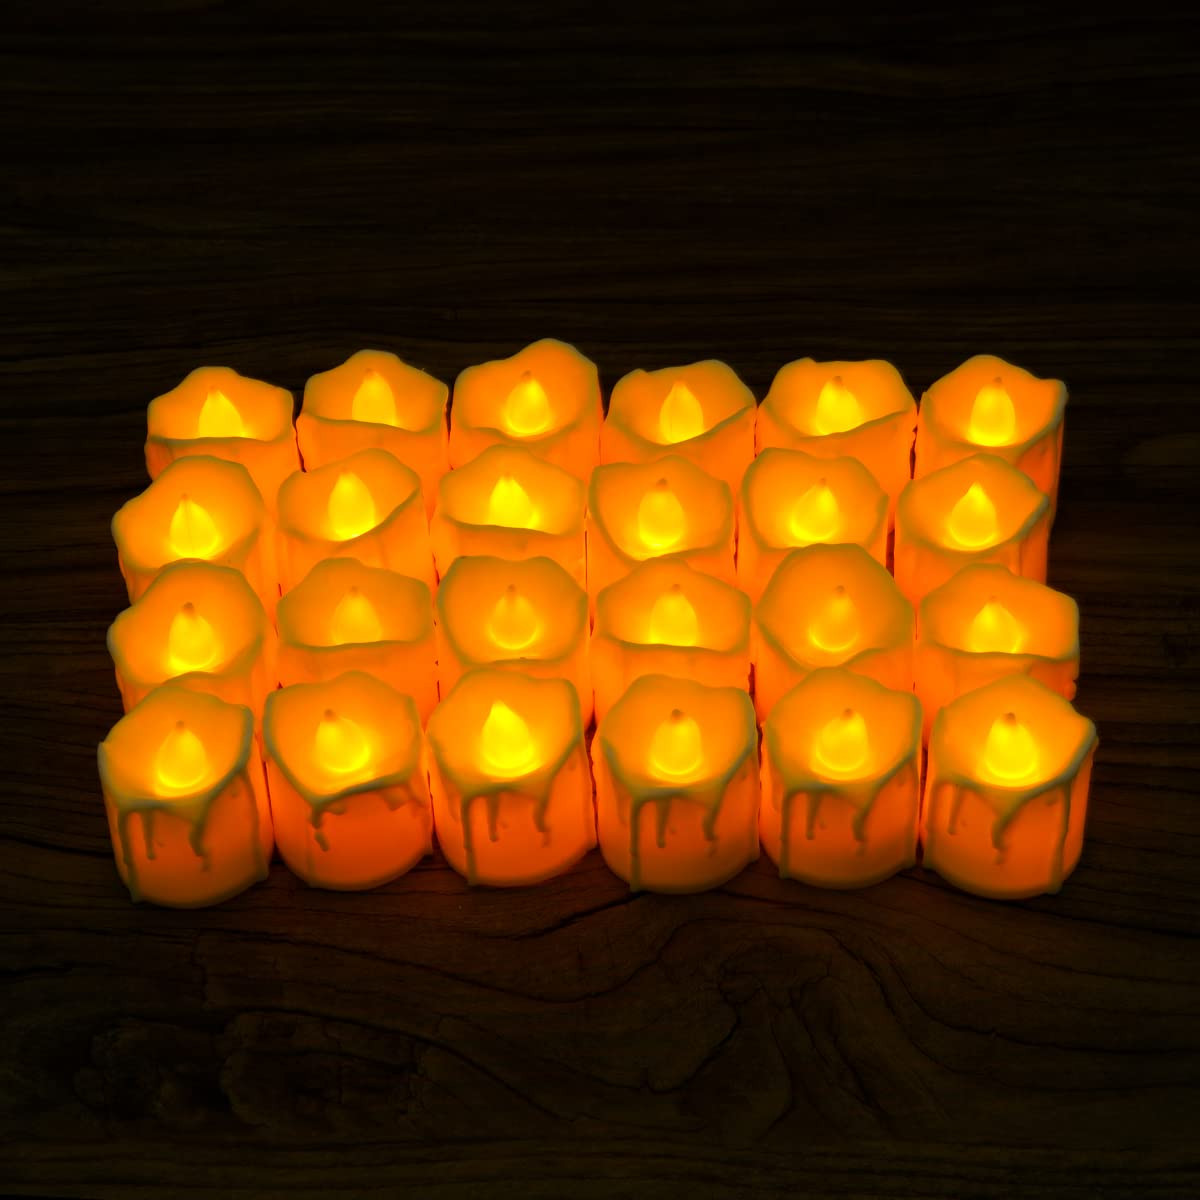 Kuber LED Candles for Home Decoration |Battey Operated |Flameless Yellow Light |Diwali Lights for Home Decoration, Along with Other Festivities & Parties | Pack of 24, Yellow